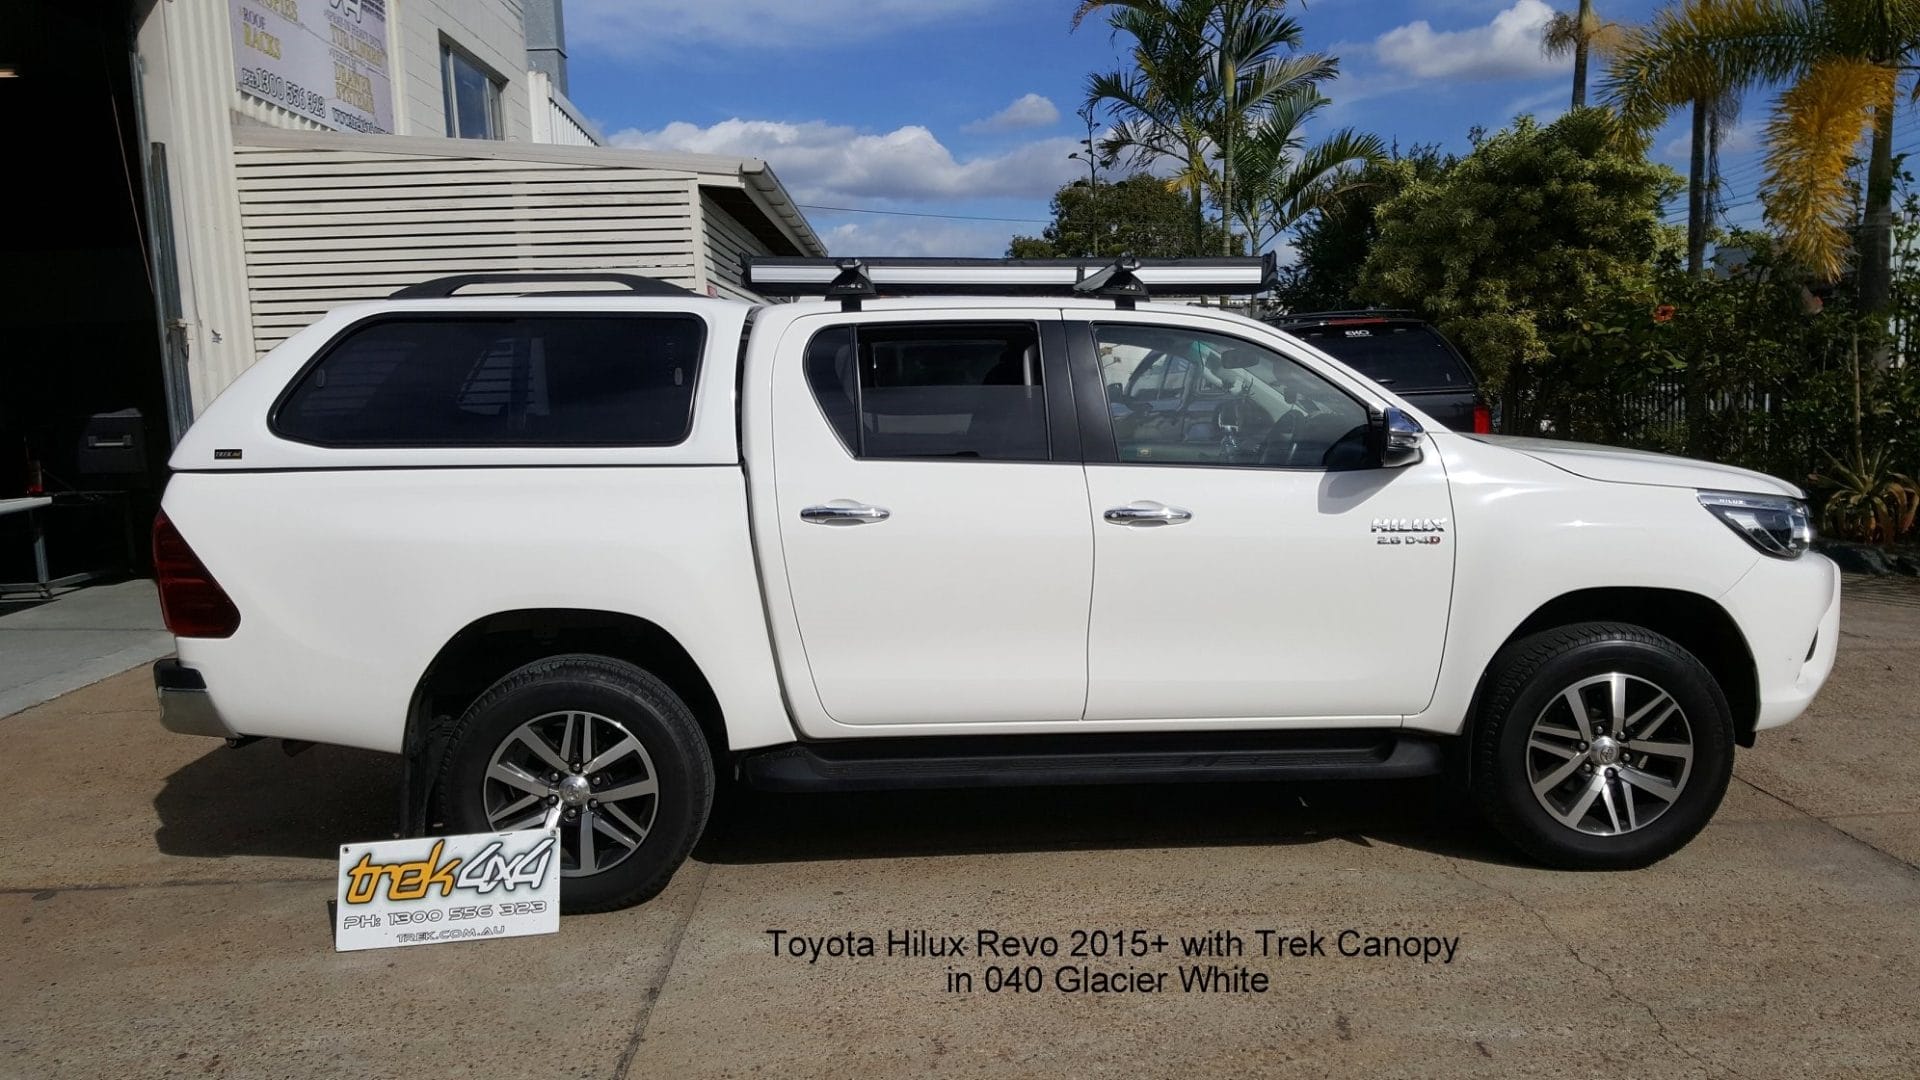 Toyota Hilux 2016 TREK Canopy – Canopies for your ute or 4×4 Vehicle